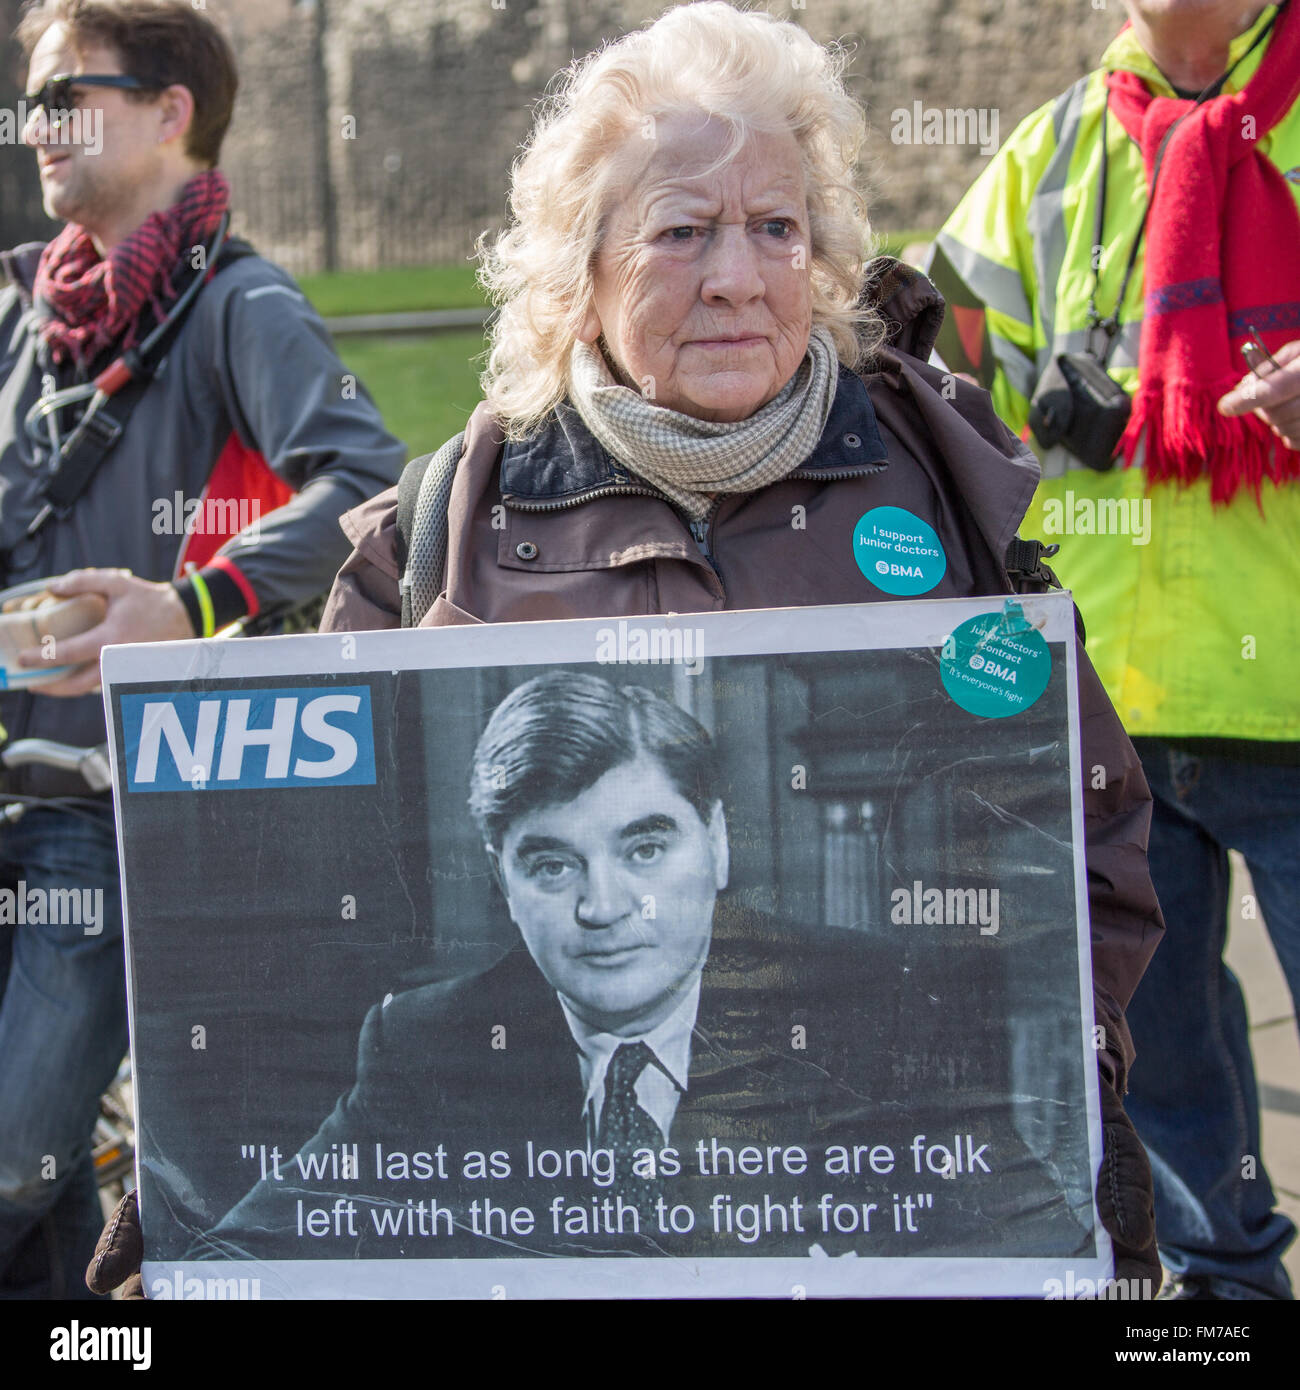 London, UK. 11 Mar 2016. Campaigners rally to support the NHS Reinstatement Bill, currently having it’s 2nd reading in the House of Commons, it seeks to stop the ongoing privatisation of the NHS and to protect it from any TTIP deals. David Rowe/Alamy Live News Stock Photo